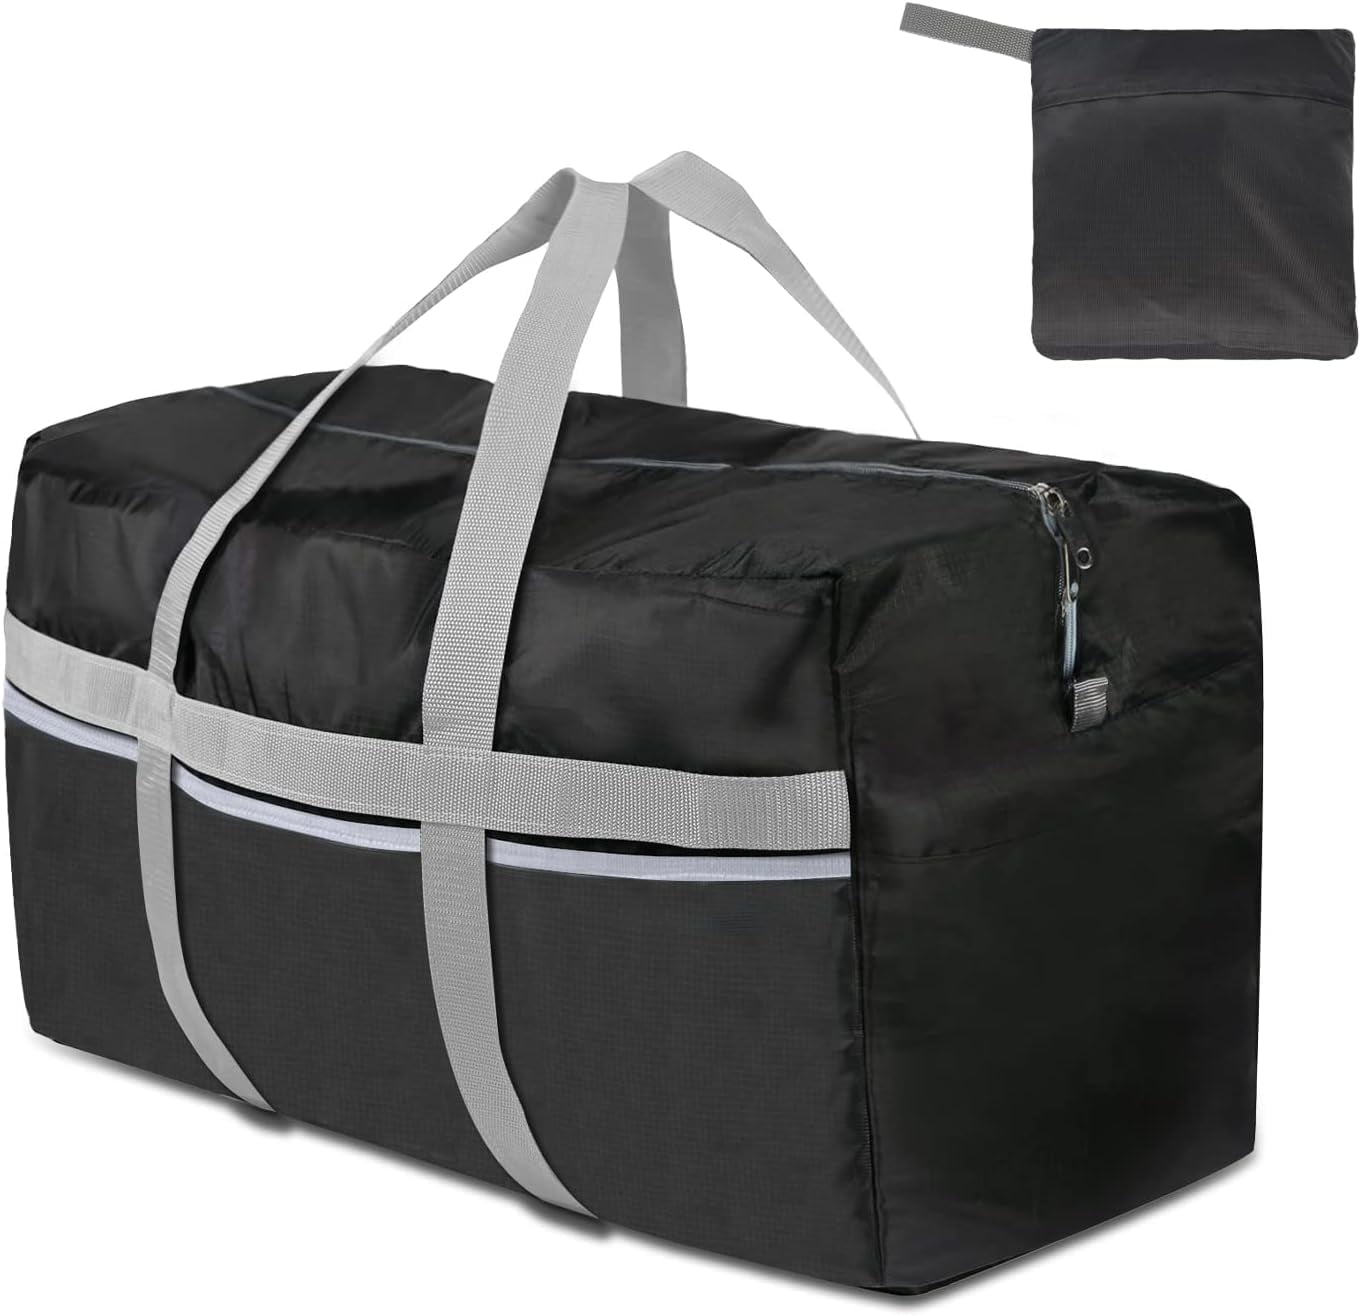 One Way DUFFLE BAG EXTRA LARGE - 130 L